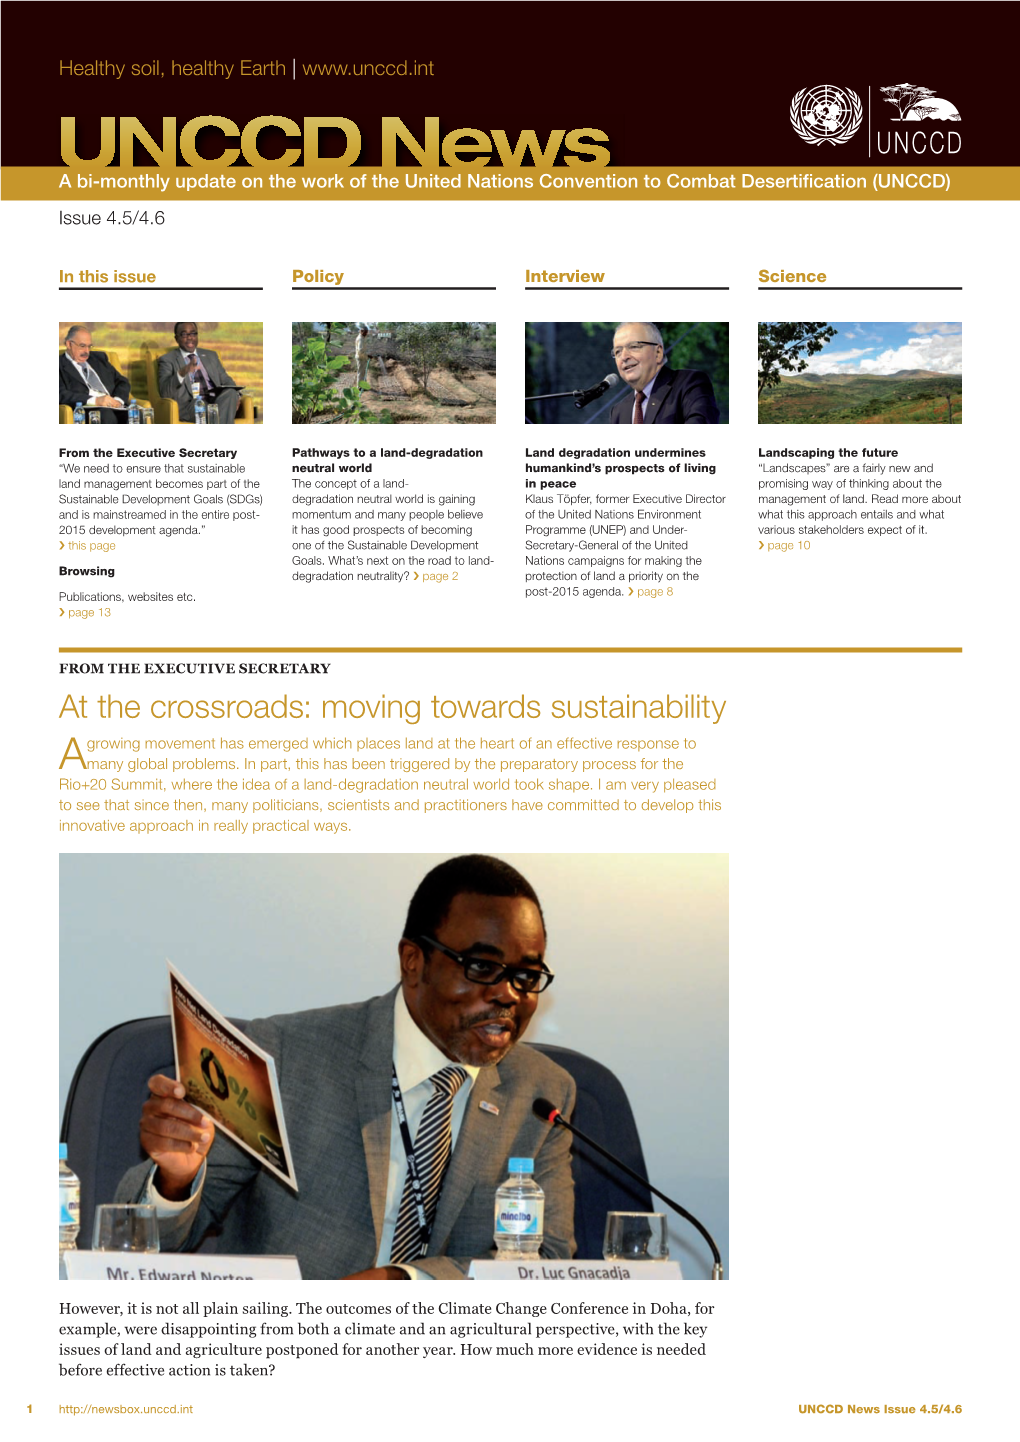 UNCCD News a Bi-Monthly Update on the Work of the United Nations Convention to Combat Desertiﬁ Cation (UNCCD) Issue 4.5/4.6